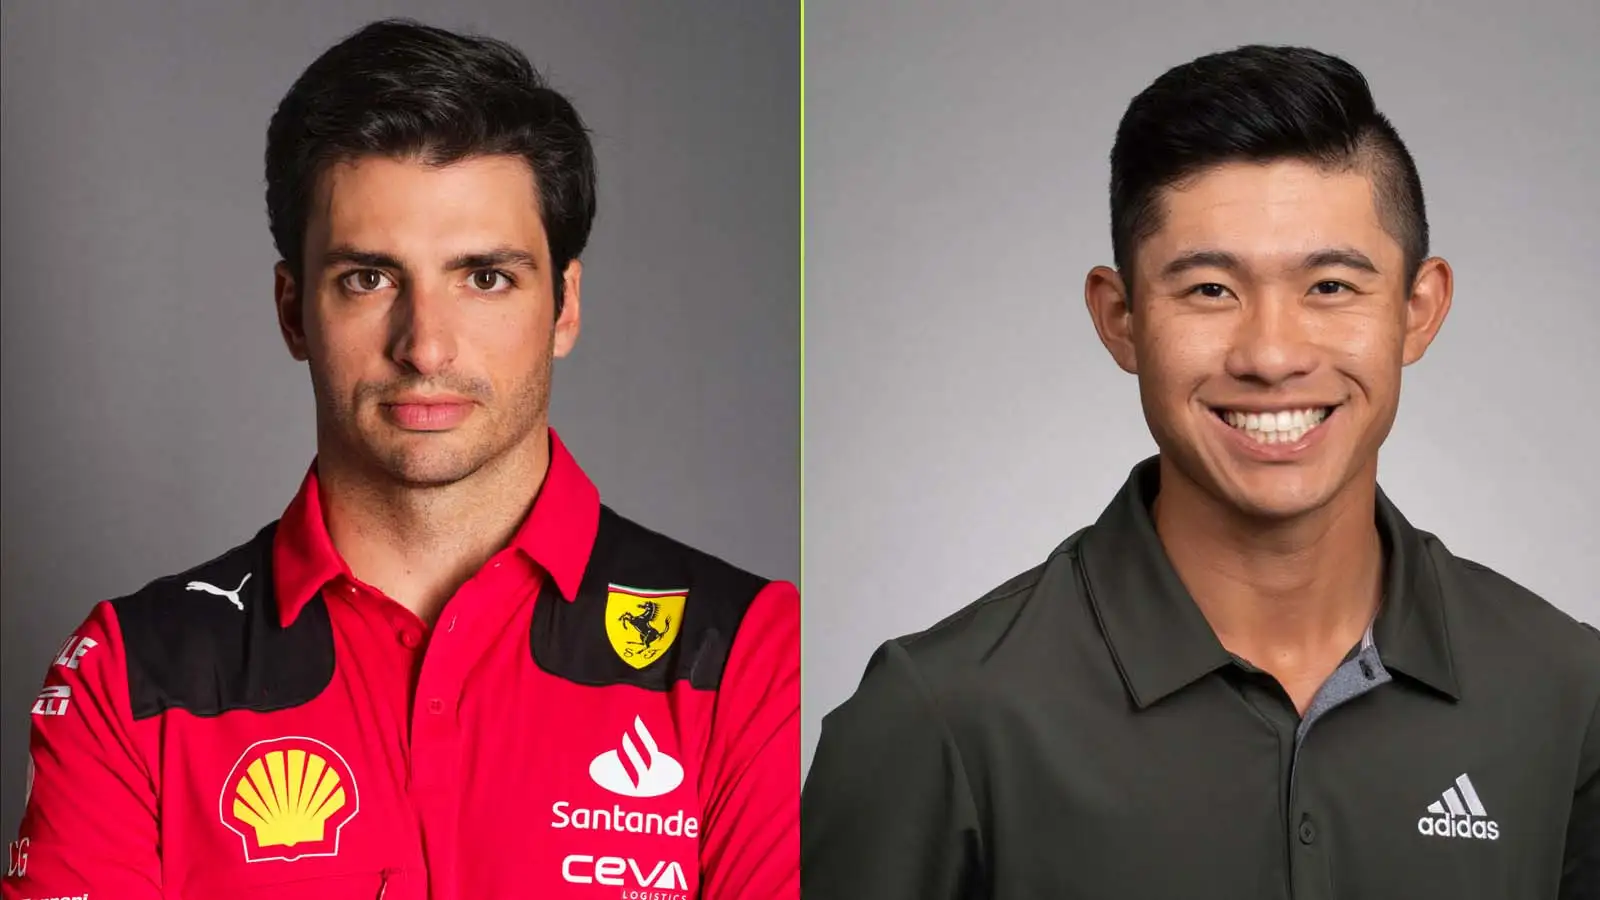 Netflix Cup golf tournament announced with F1 drivers.